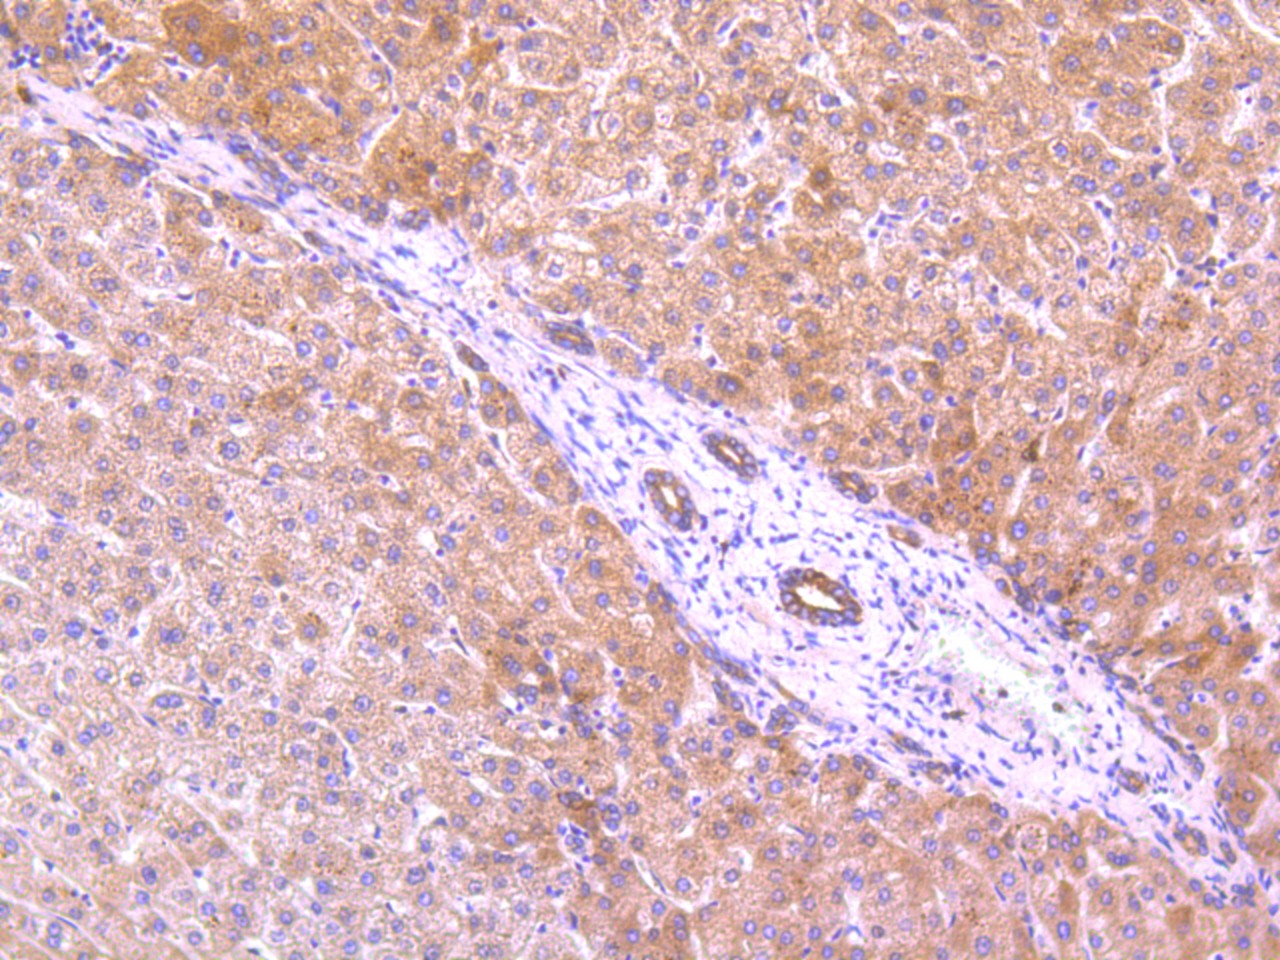 Immunohistochemical analysis of paraffin-embedded human liver tissue using anti-EGFR antibody. Counter stained with hematoxylin.